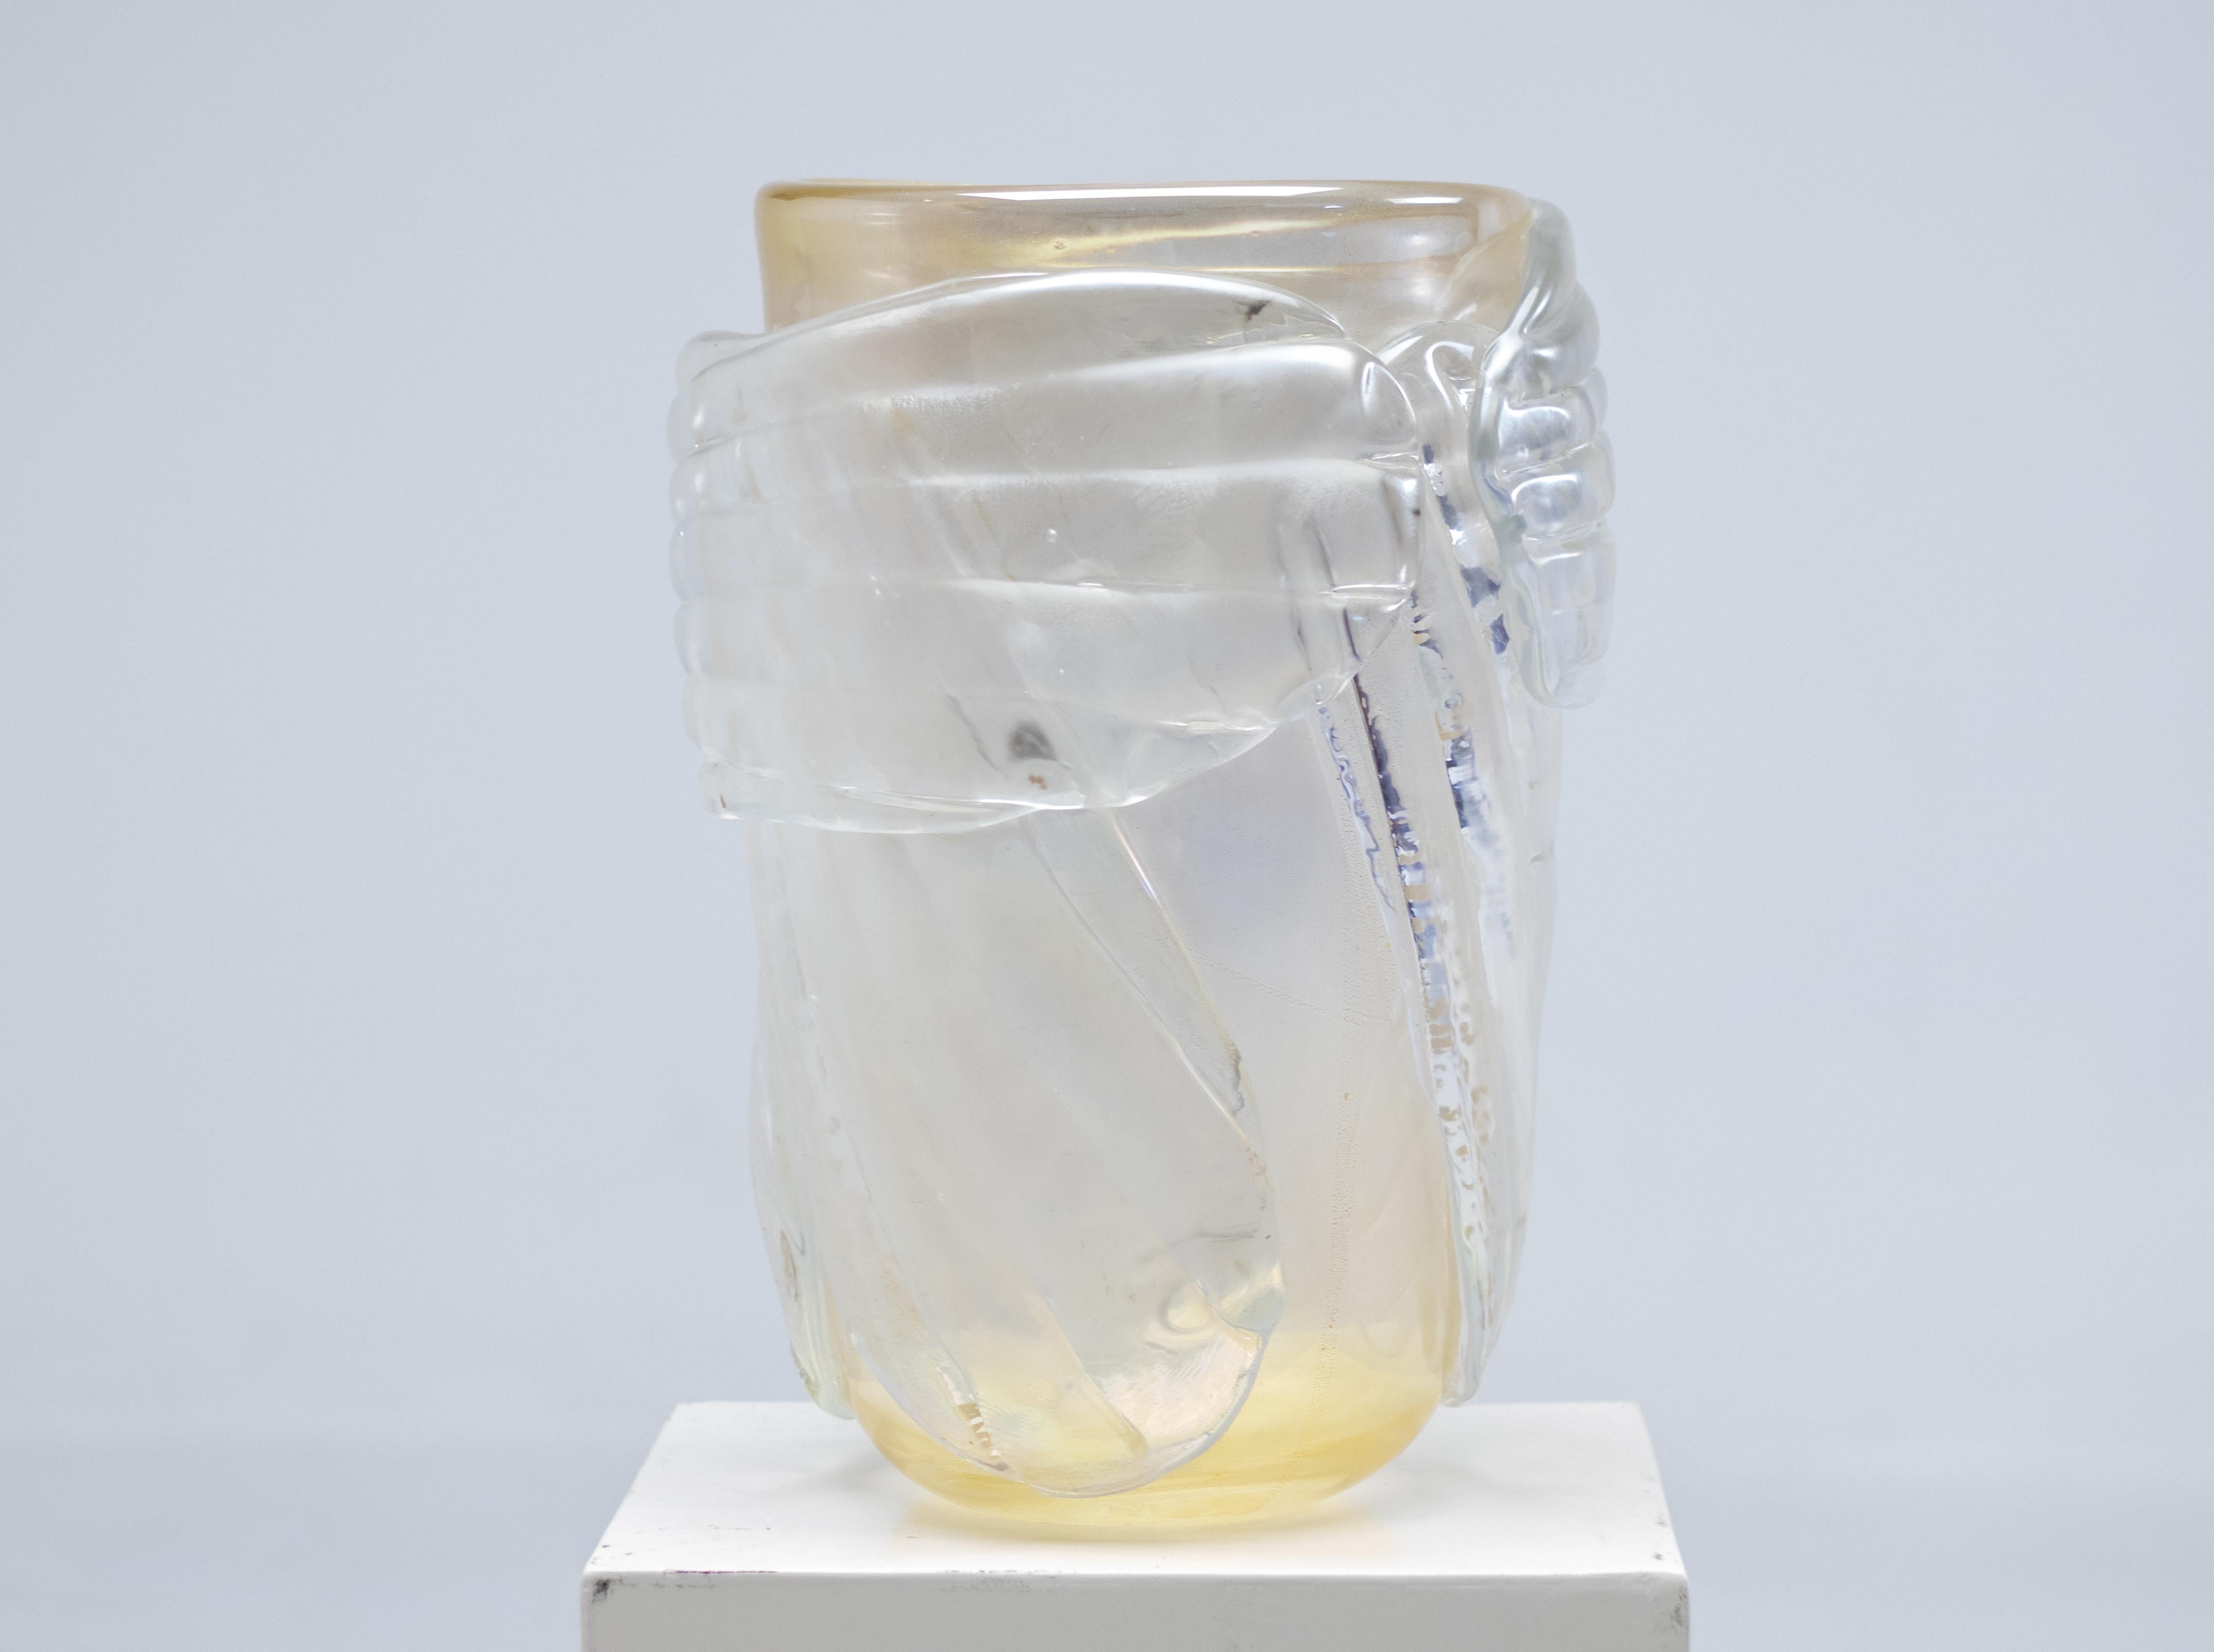 Very large and heavy iridescent glass vase with subtle gold foil inclusions signed Colizza.
Handcrafted by Carlo & Emanuele Colizza at their glass furnace and factory Antichi Angeli.
Engraved at the bottom.

AA Gallery is a contemporary glass brand